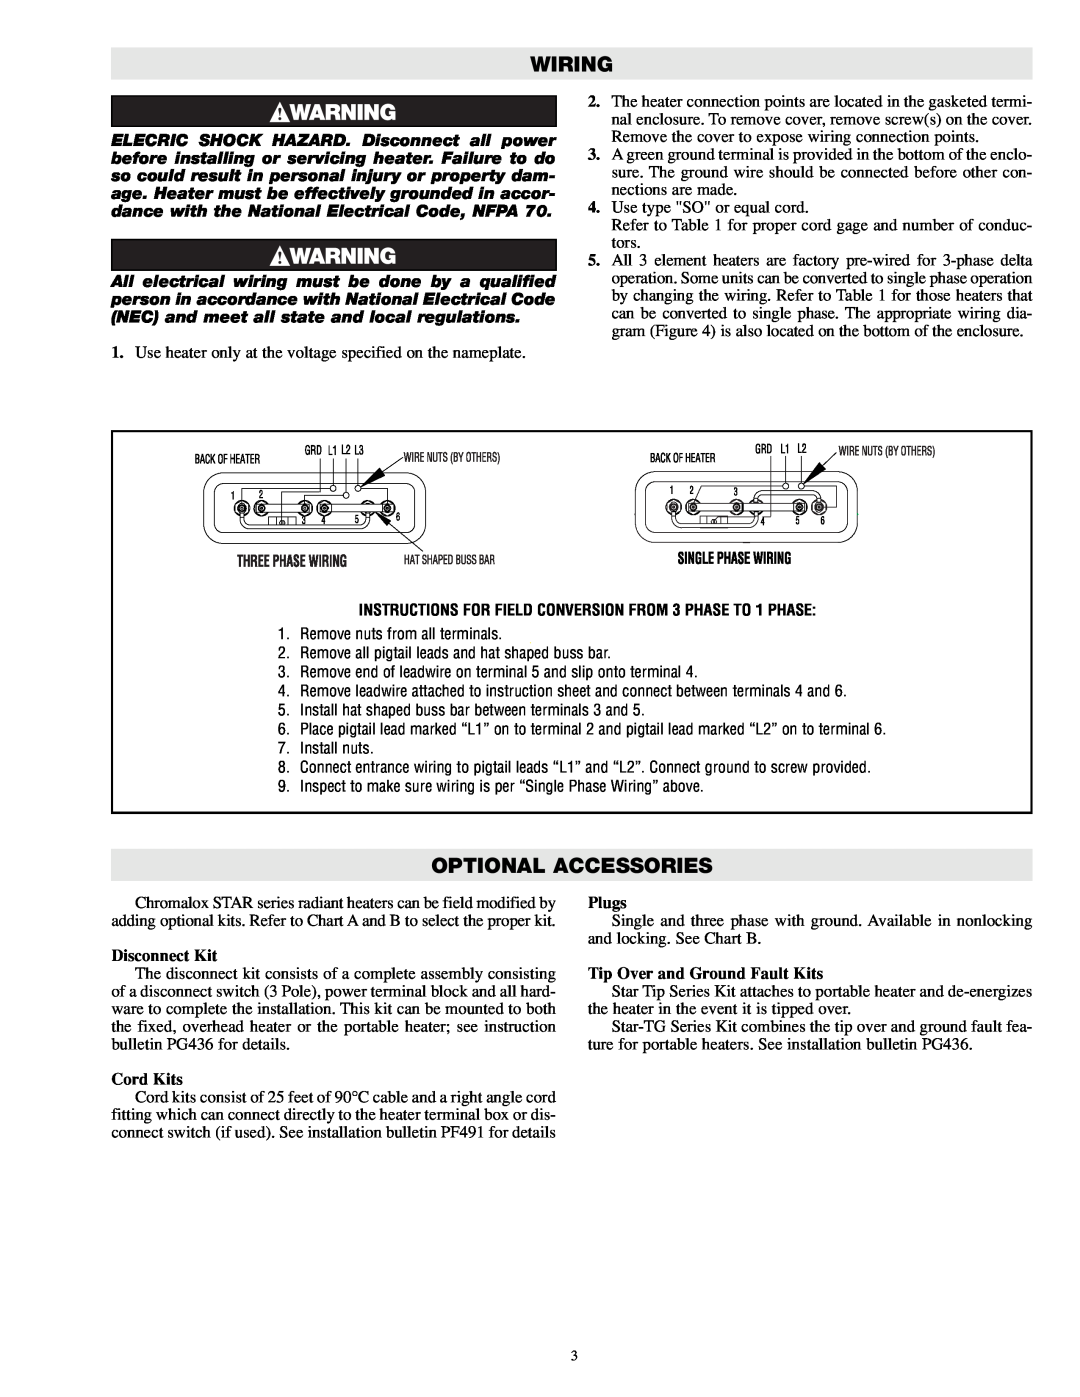 Chromalox PG433-1 Wiring, Optional Accessories, Disconnect Kit, Cord Kits, Plugs, Tip Over and Ground Fault Kits 